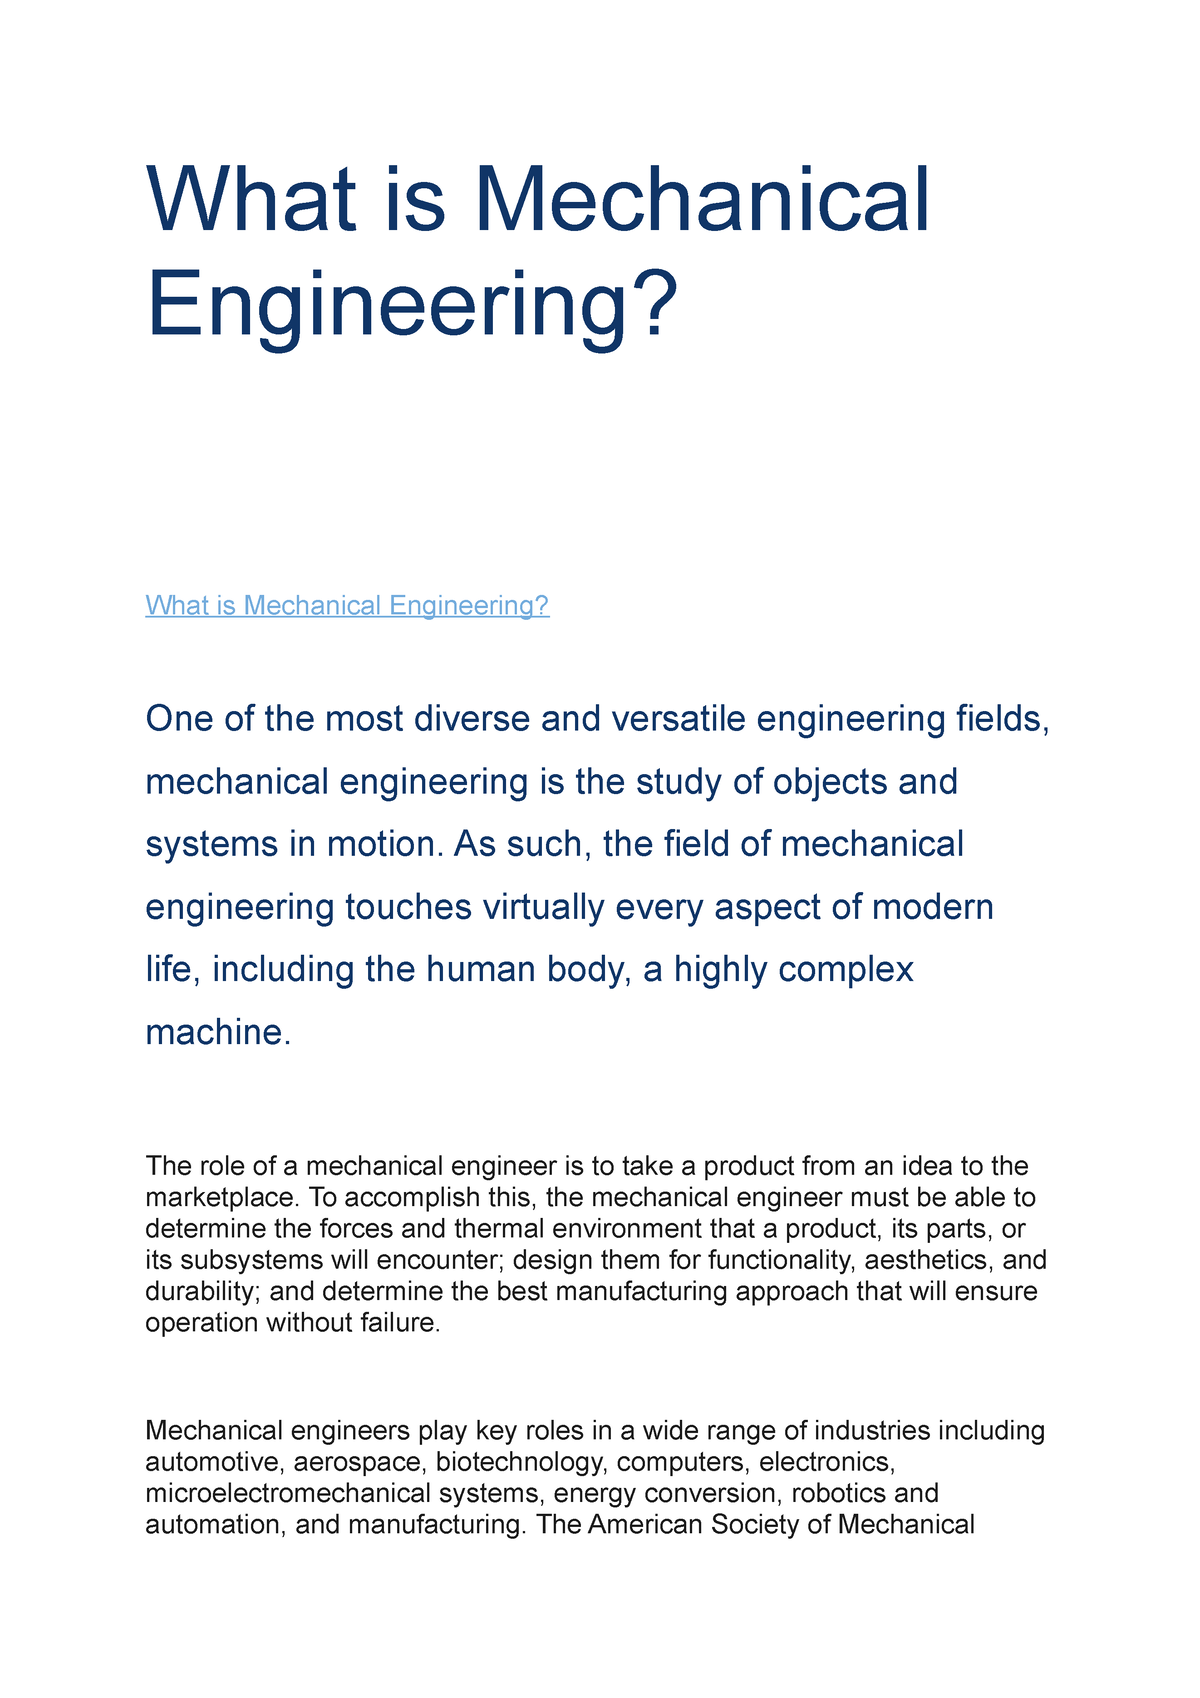 sample thesis title for mechanical engineering